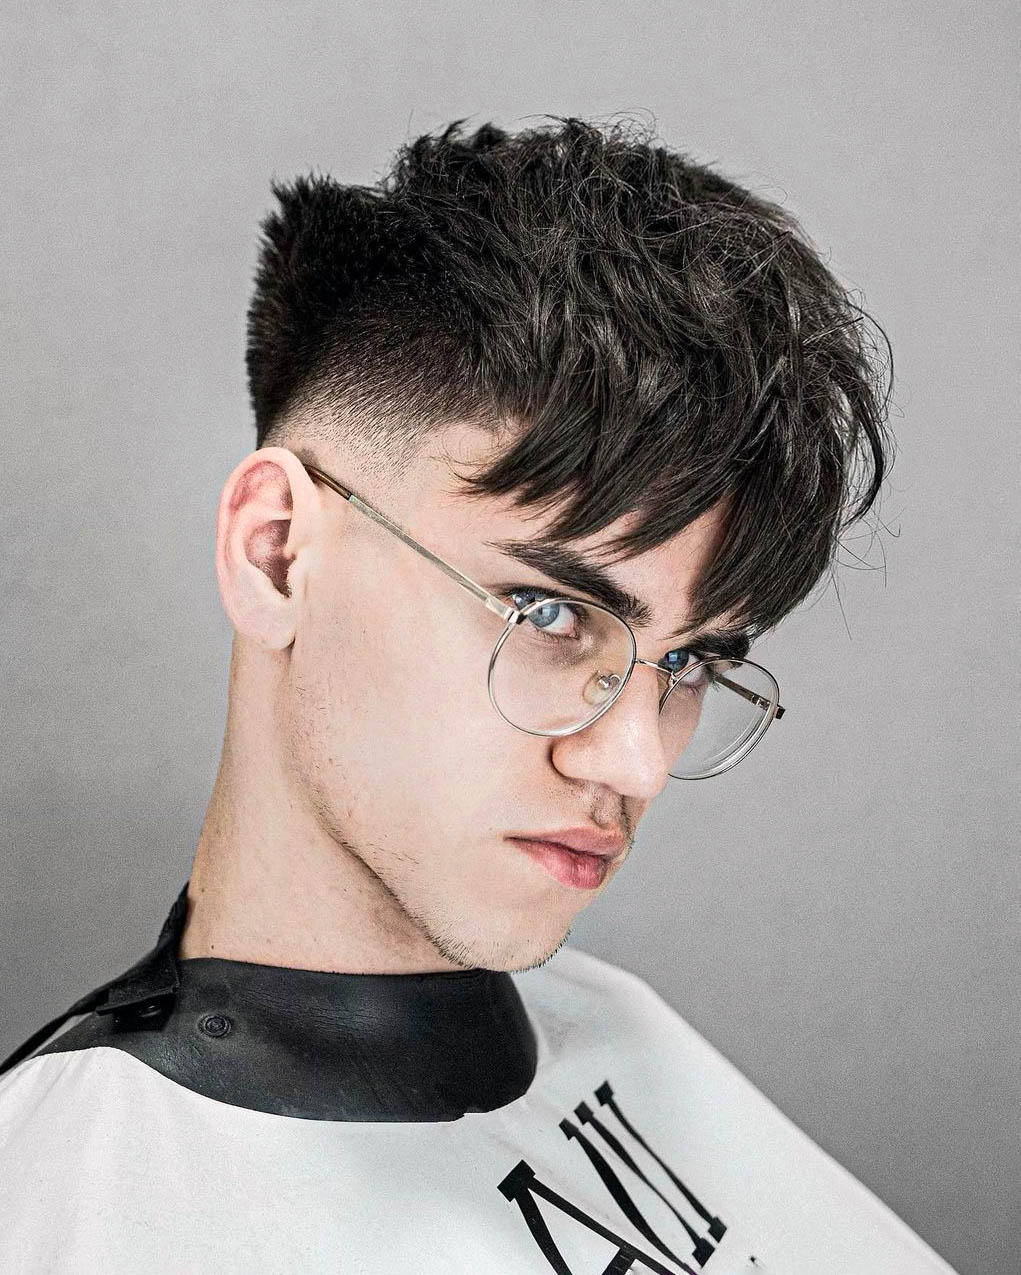 Low bald fade with bangs